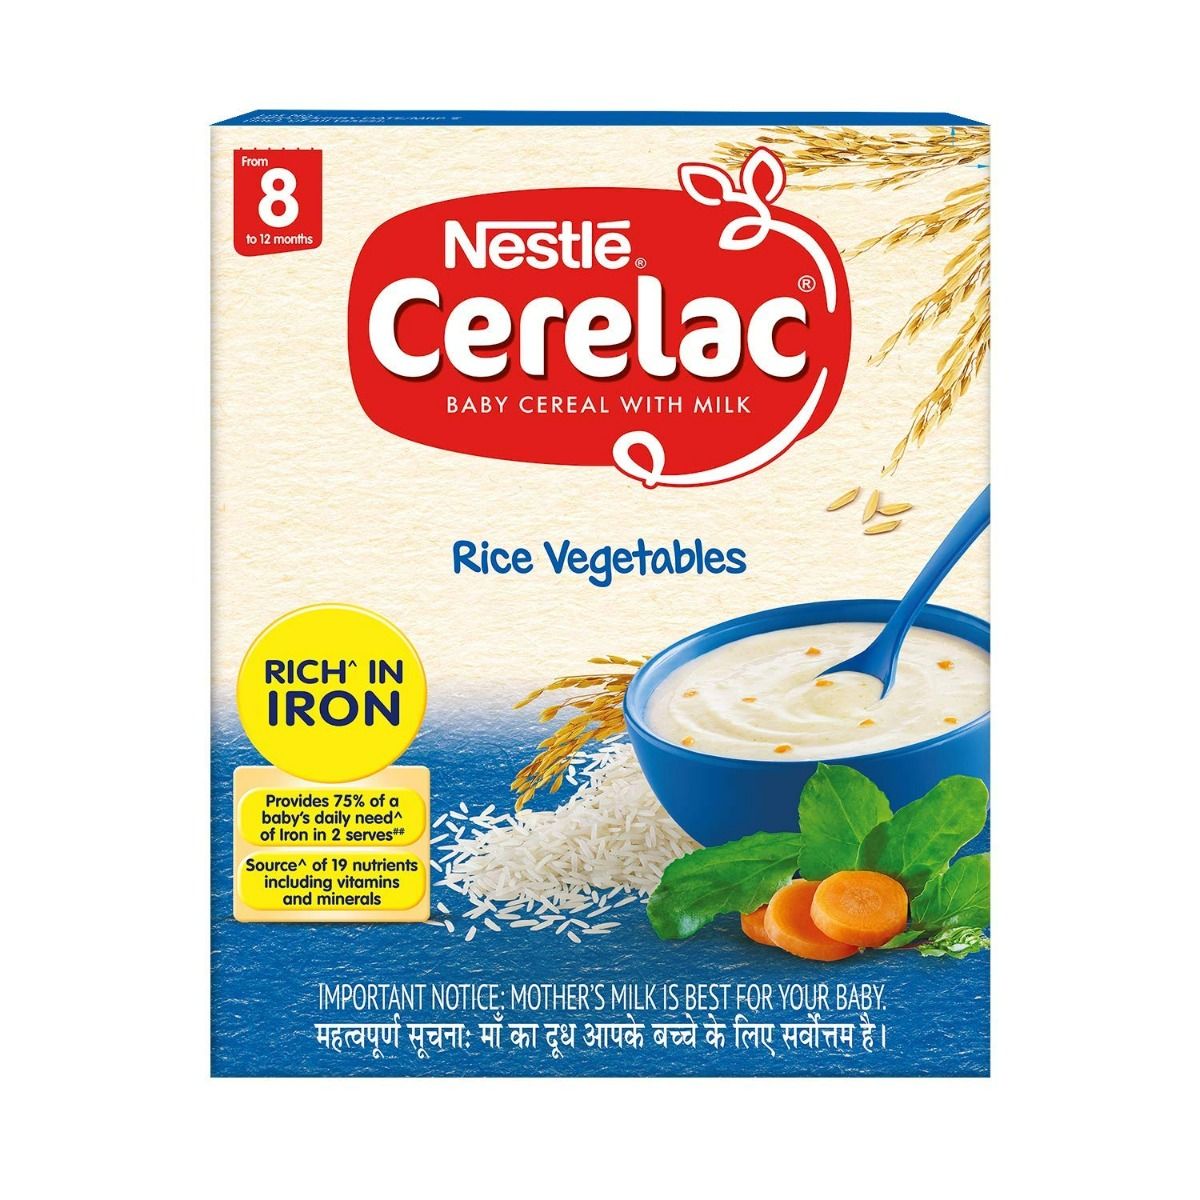 Buy Nestle Cerelac Baby Cereal with Milk Wheat Rice Vegetables (From 8 to 12 Months) Powder, 300 gm Refill Pack Online